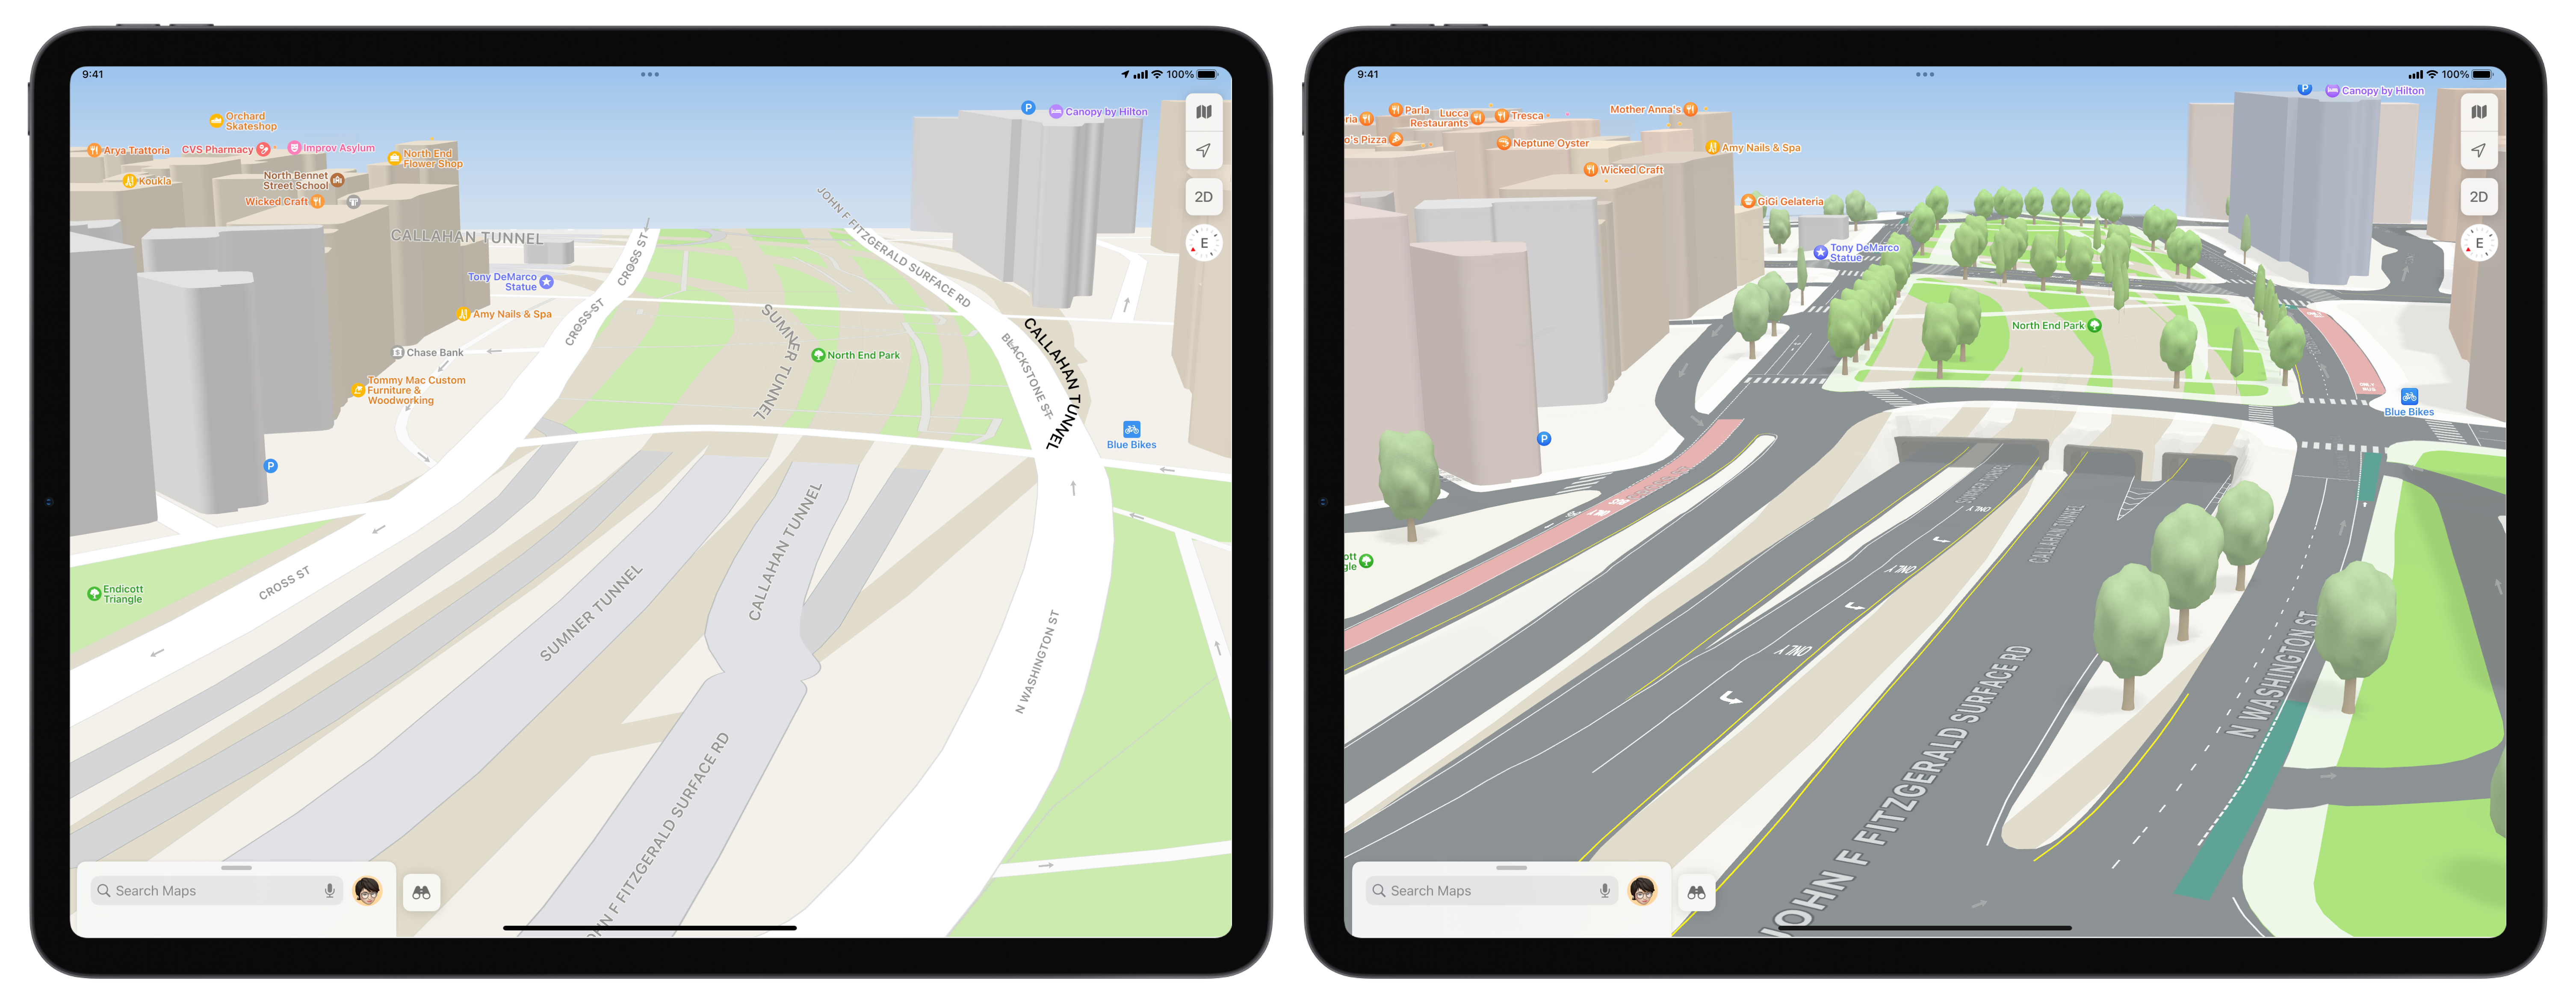 A side-by-side comparison shows an Apple Maps rendering of Boston's Callahan tunnel before and after the new upgrades. The rendering on the right includes road markings, elevation, and trees.